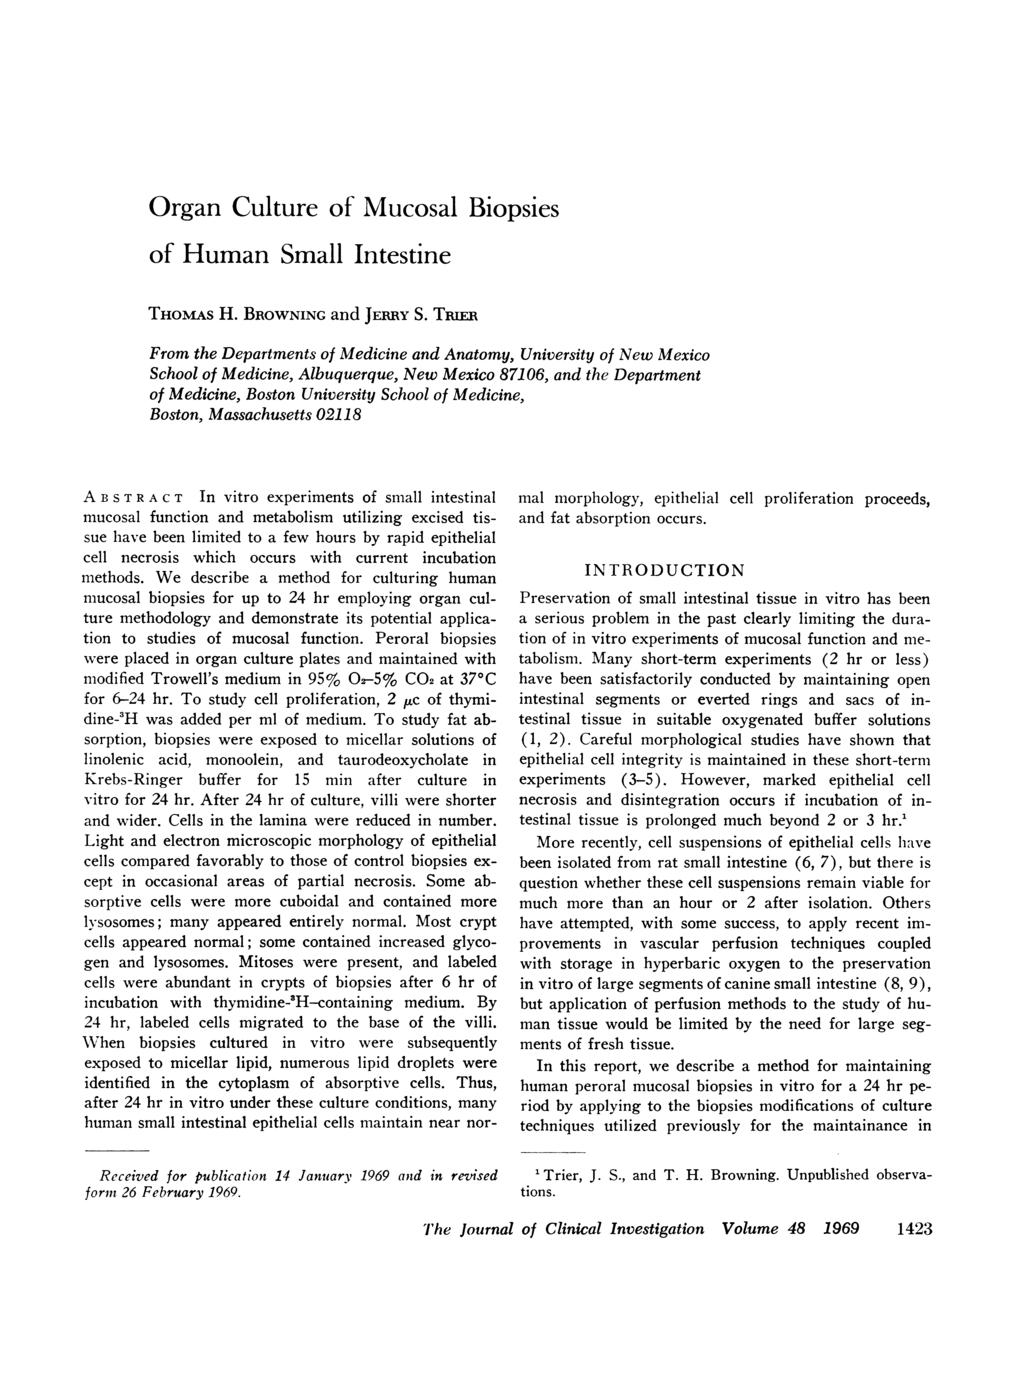 Organ Culture of Mucosal Biopsies of Human Small Intestine THOMAS H. BROWNING and JERRY S.